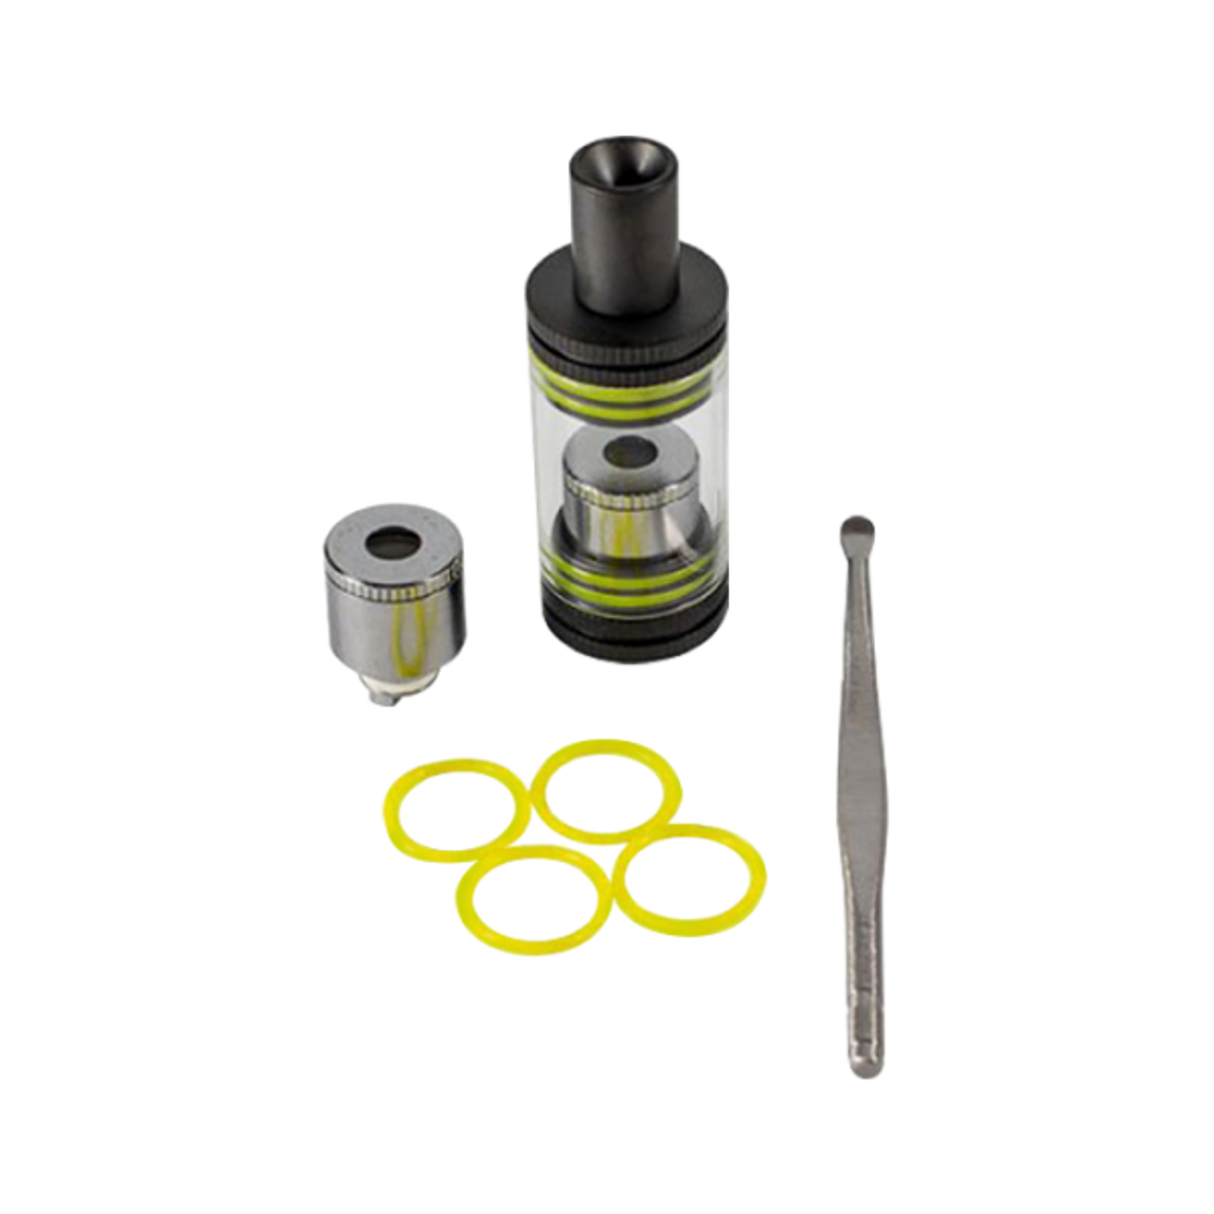 HoneyStick Highbrid Rebuild Kit with quartz dab tool, battery-powered chamber, and spare rings